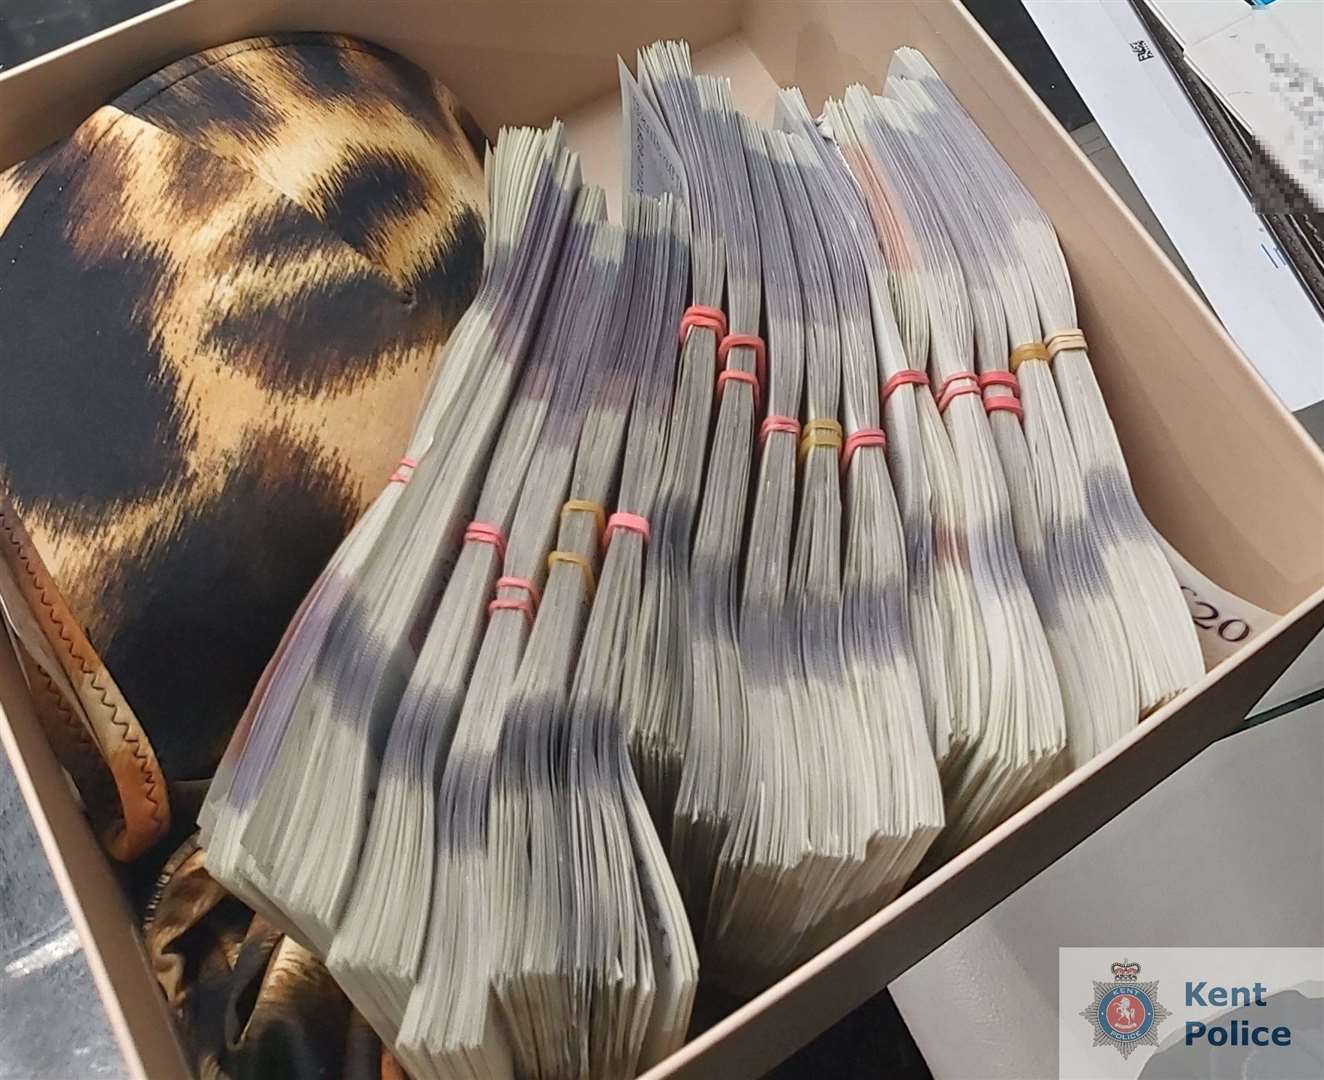 Police also seized cash from a house in Gravesend